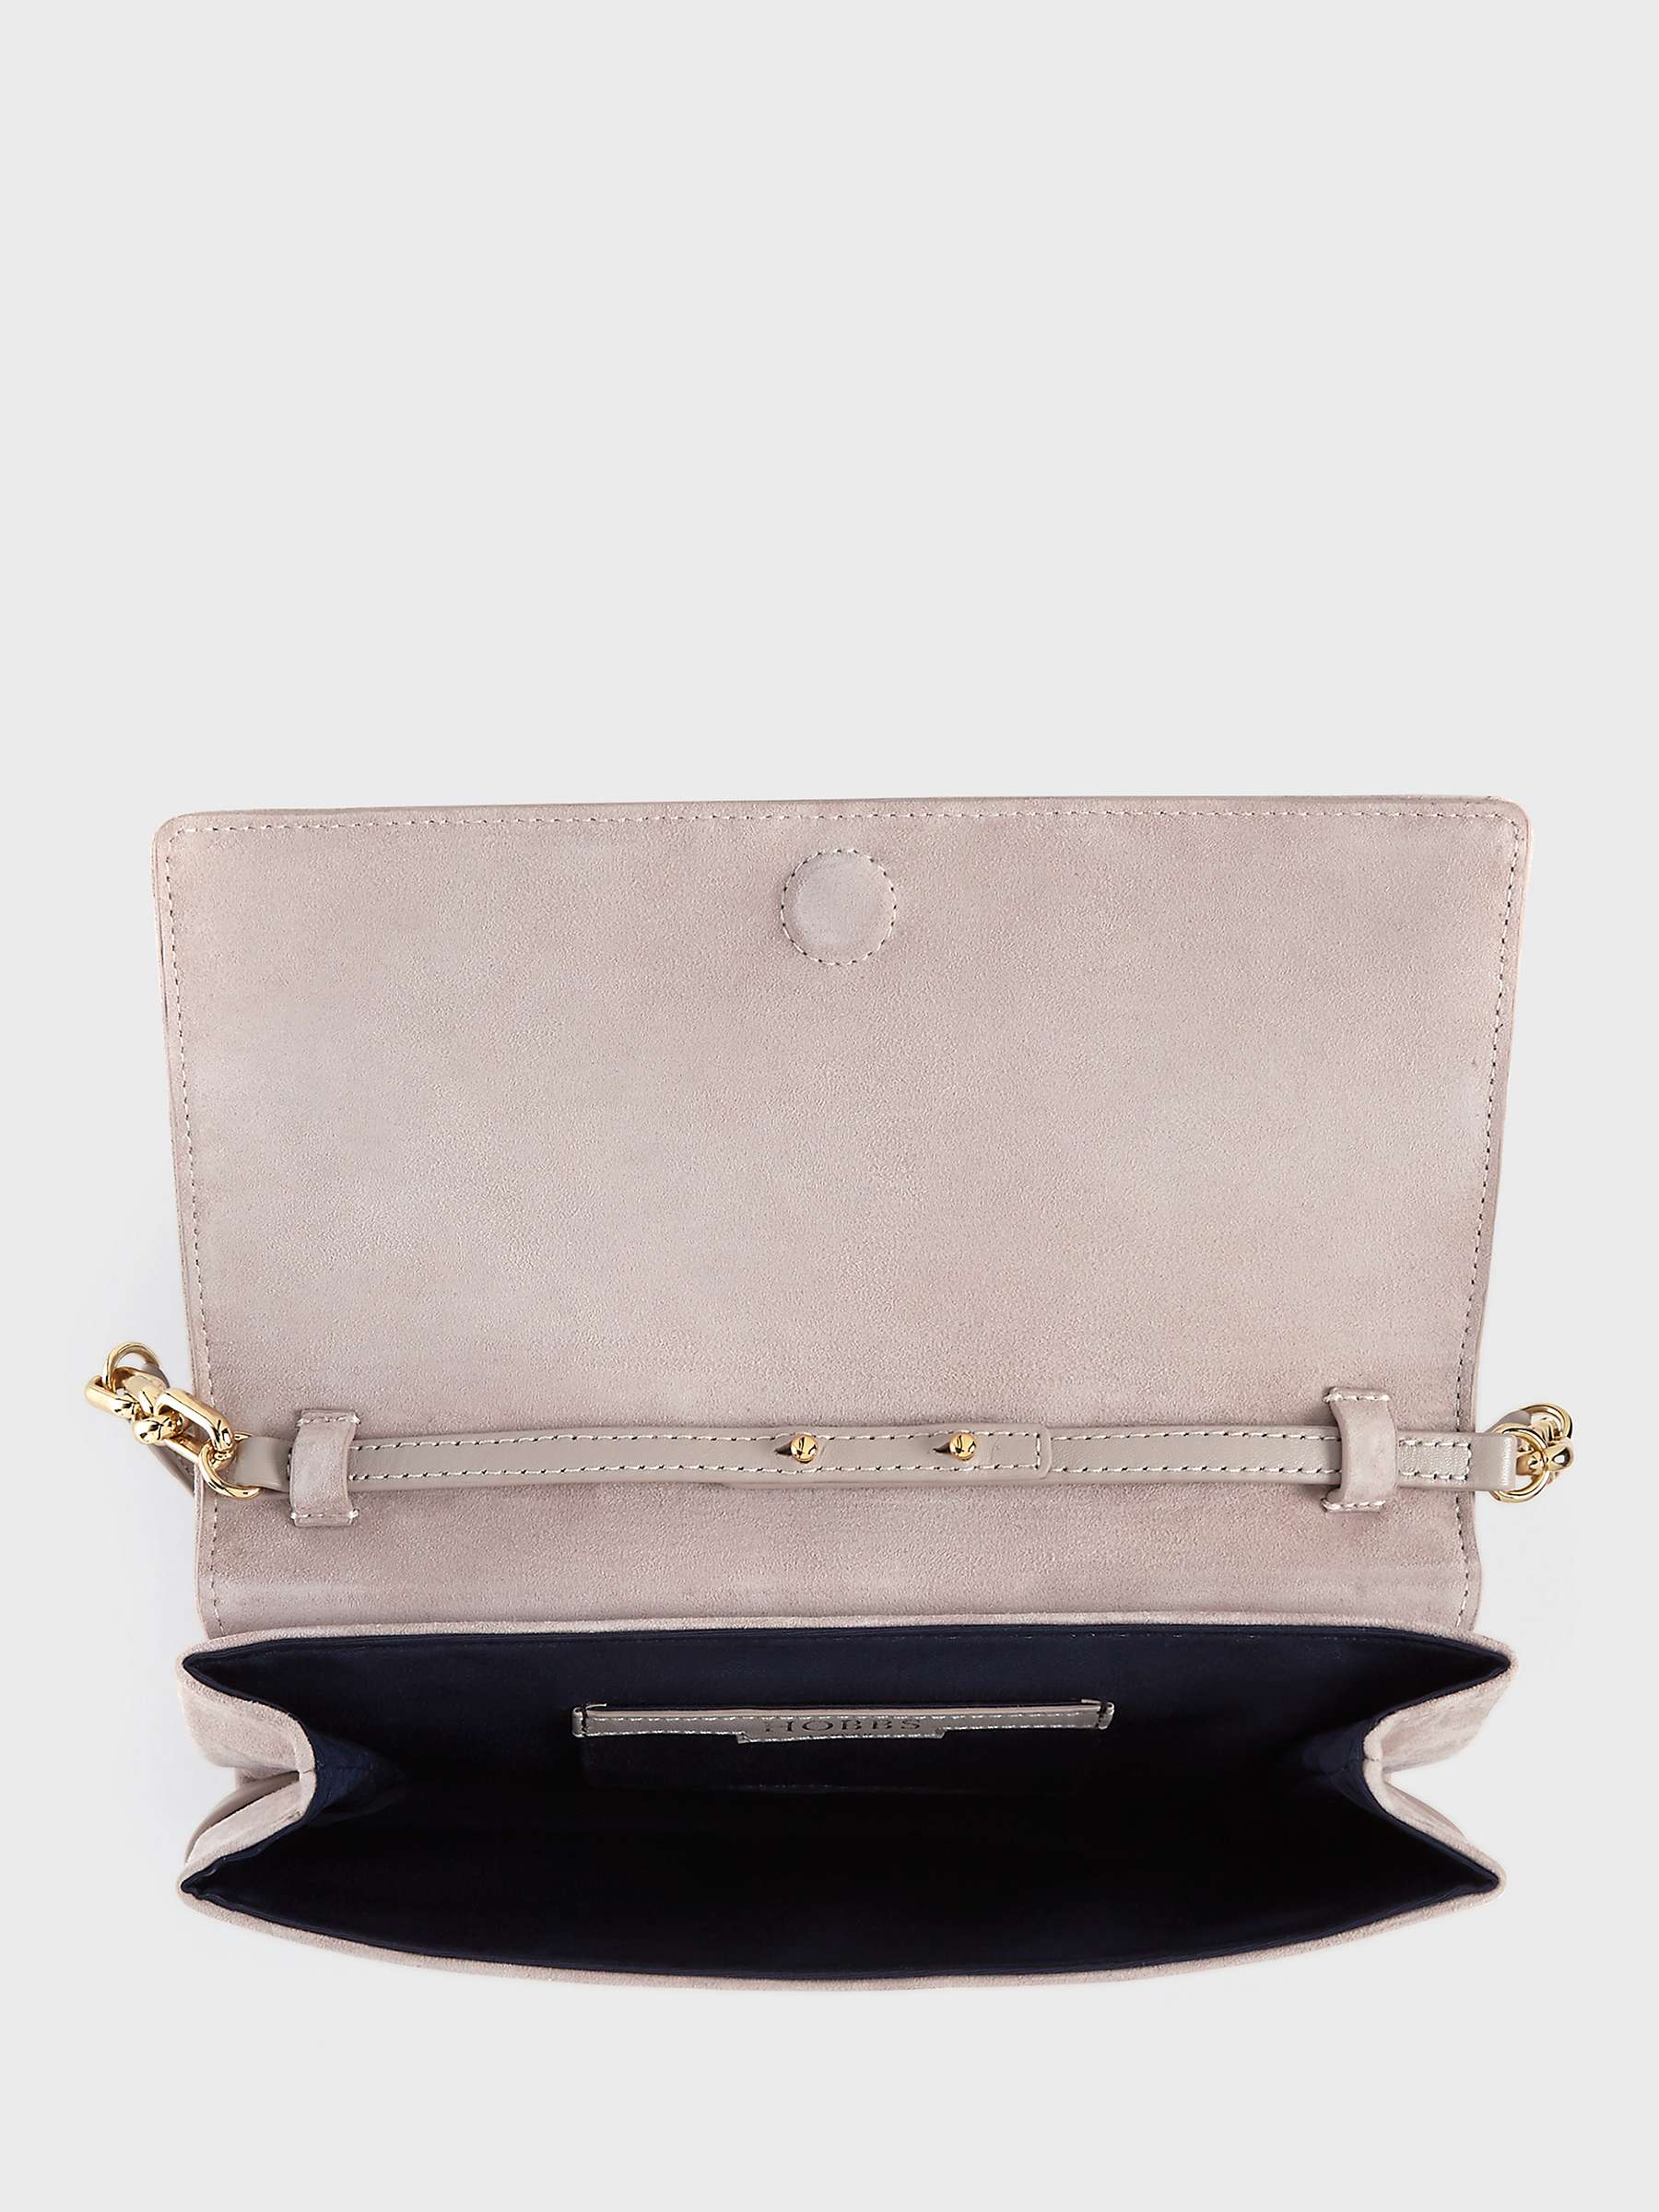 Buy Hobbs Honour Suede and Leather Clutch Bag Online at johnlewis.com